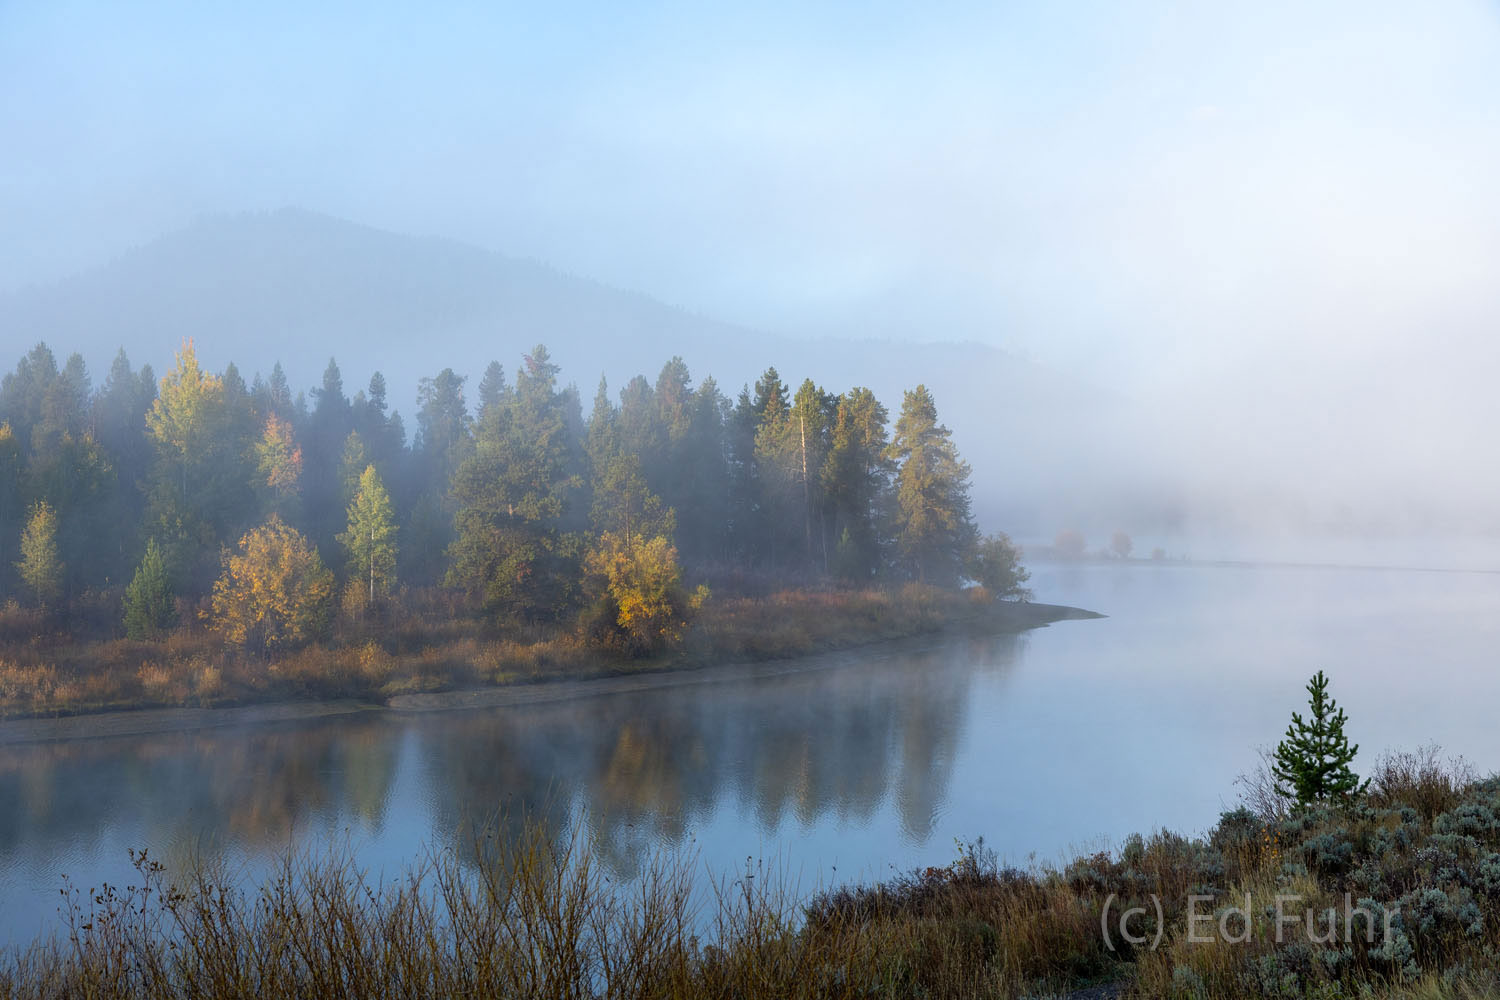 With heavy fog cloaking this quiet stretch of water,  Moran Moran and the surrounding hillsides of aspen can only be imagined...